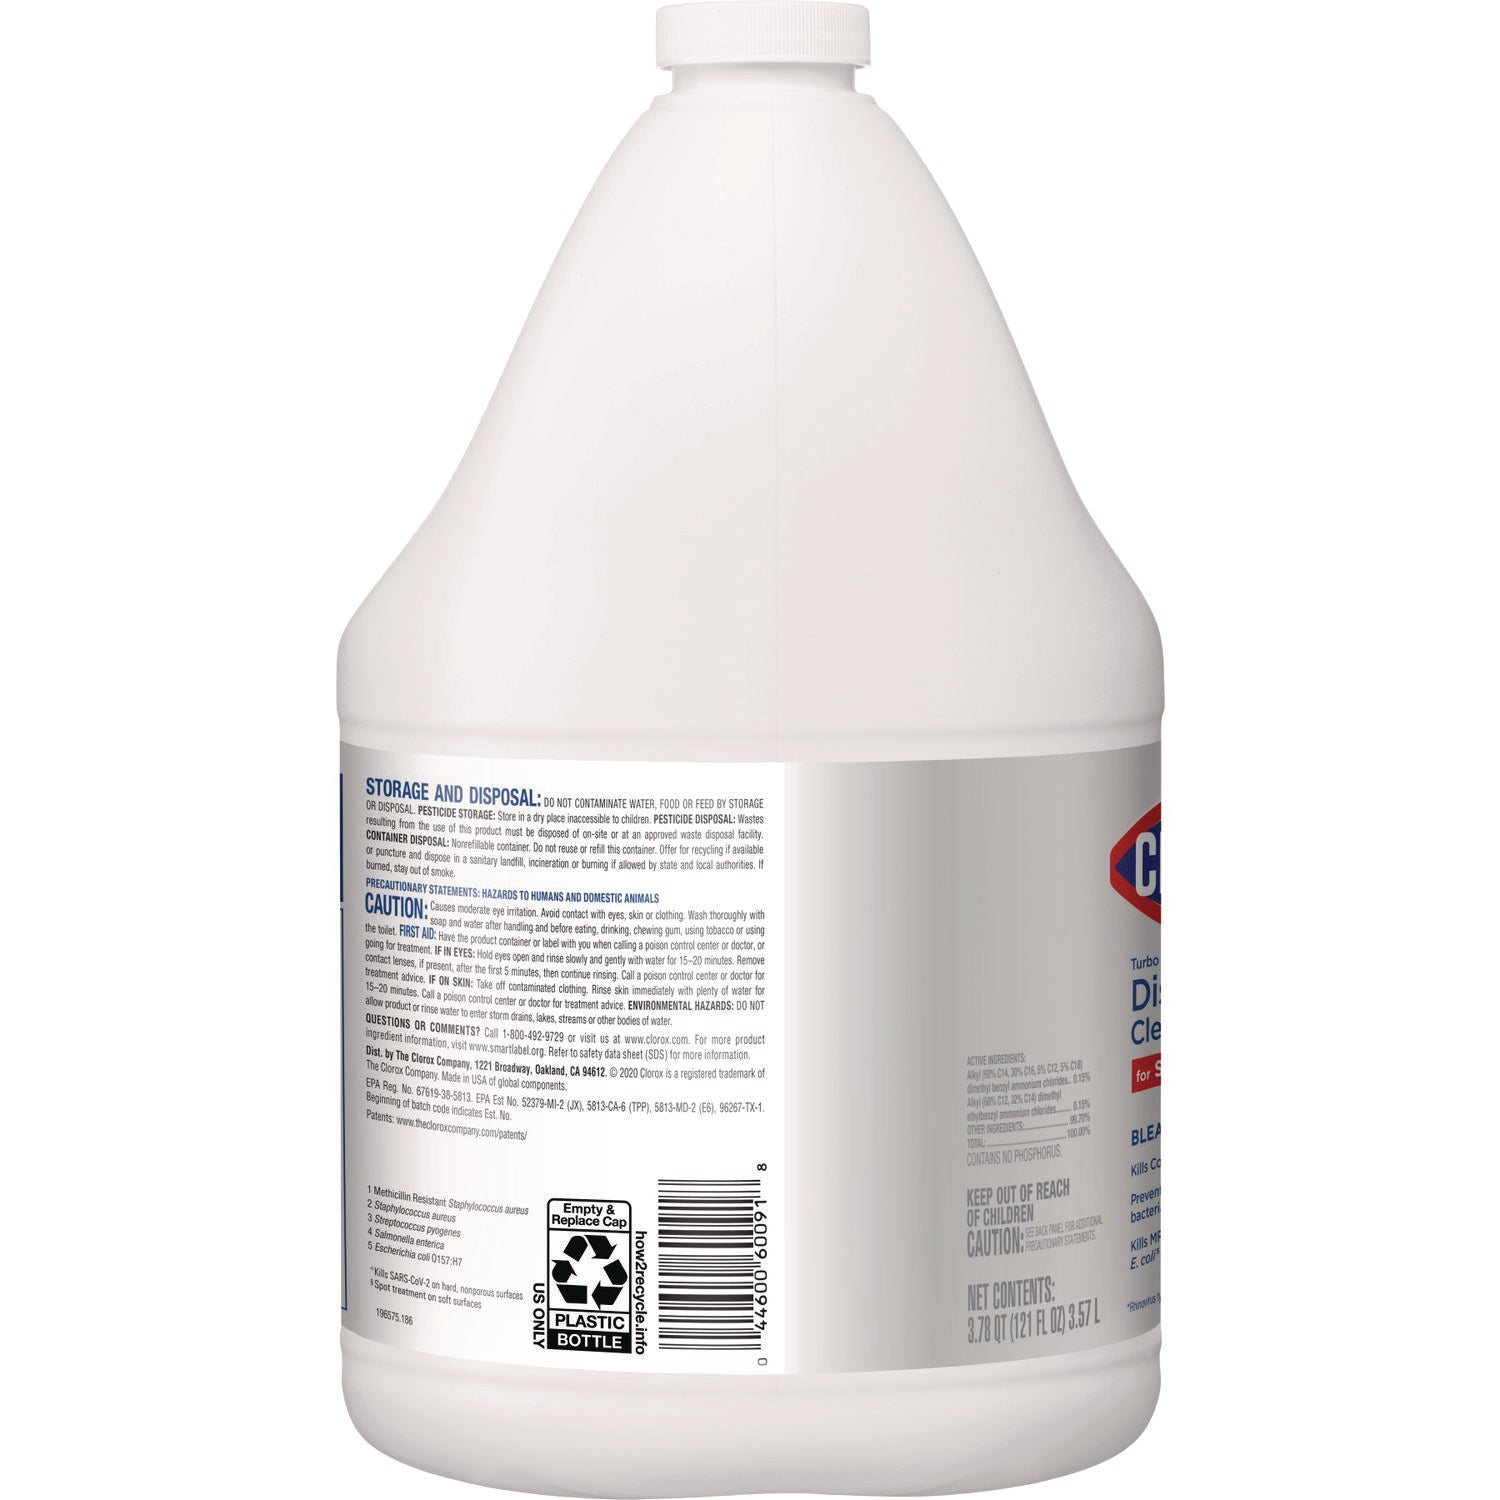 Turbo Pro Disinfectant Cleaner for Sprayer Devices, 121 oz Bottle, 3/Carton - 3